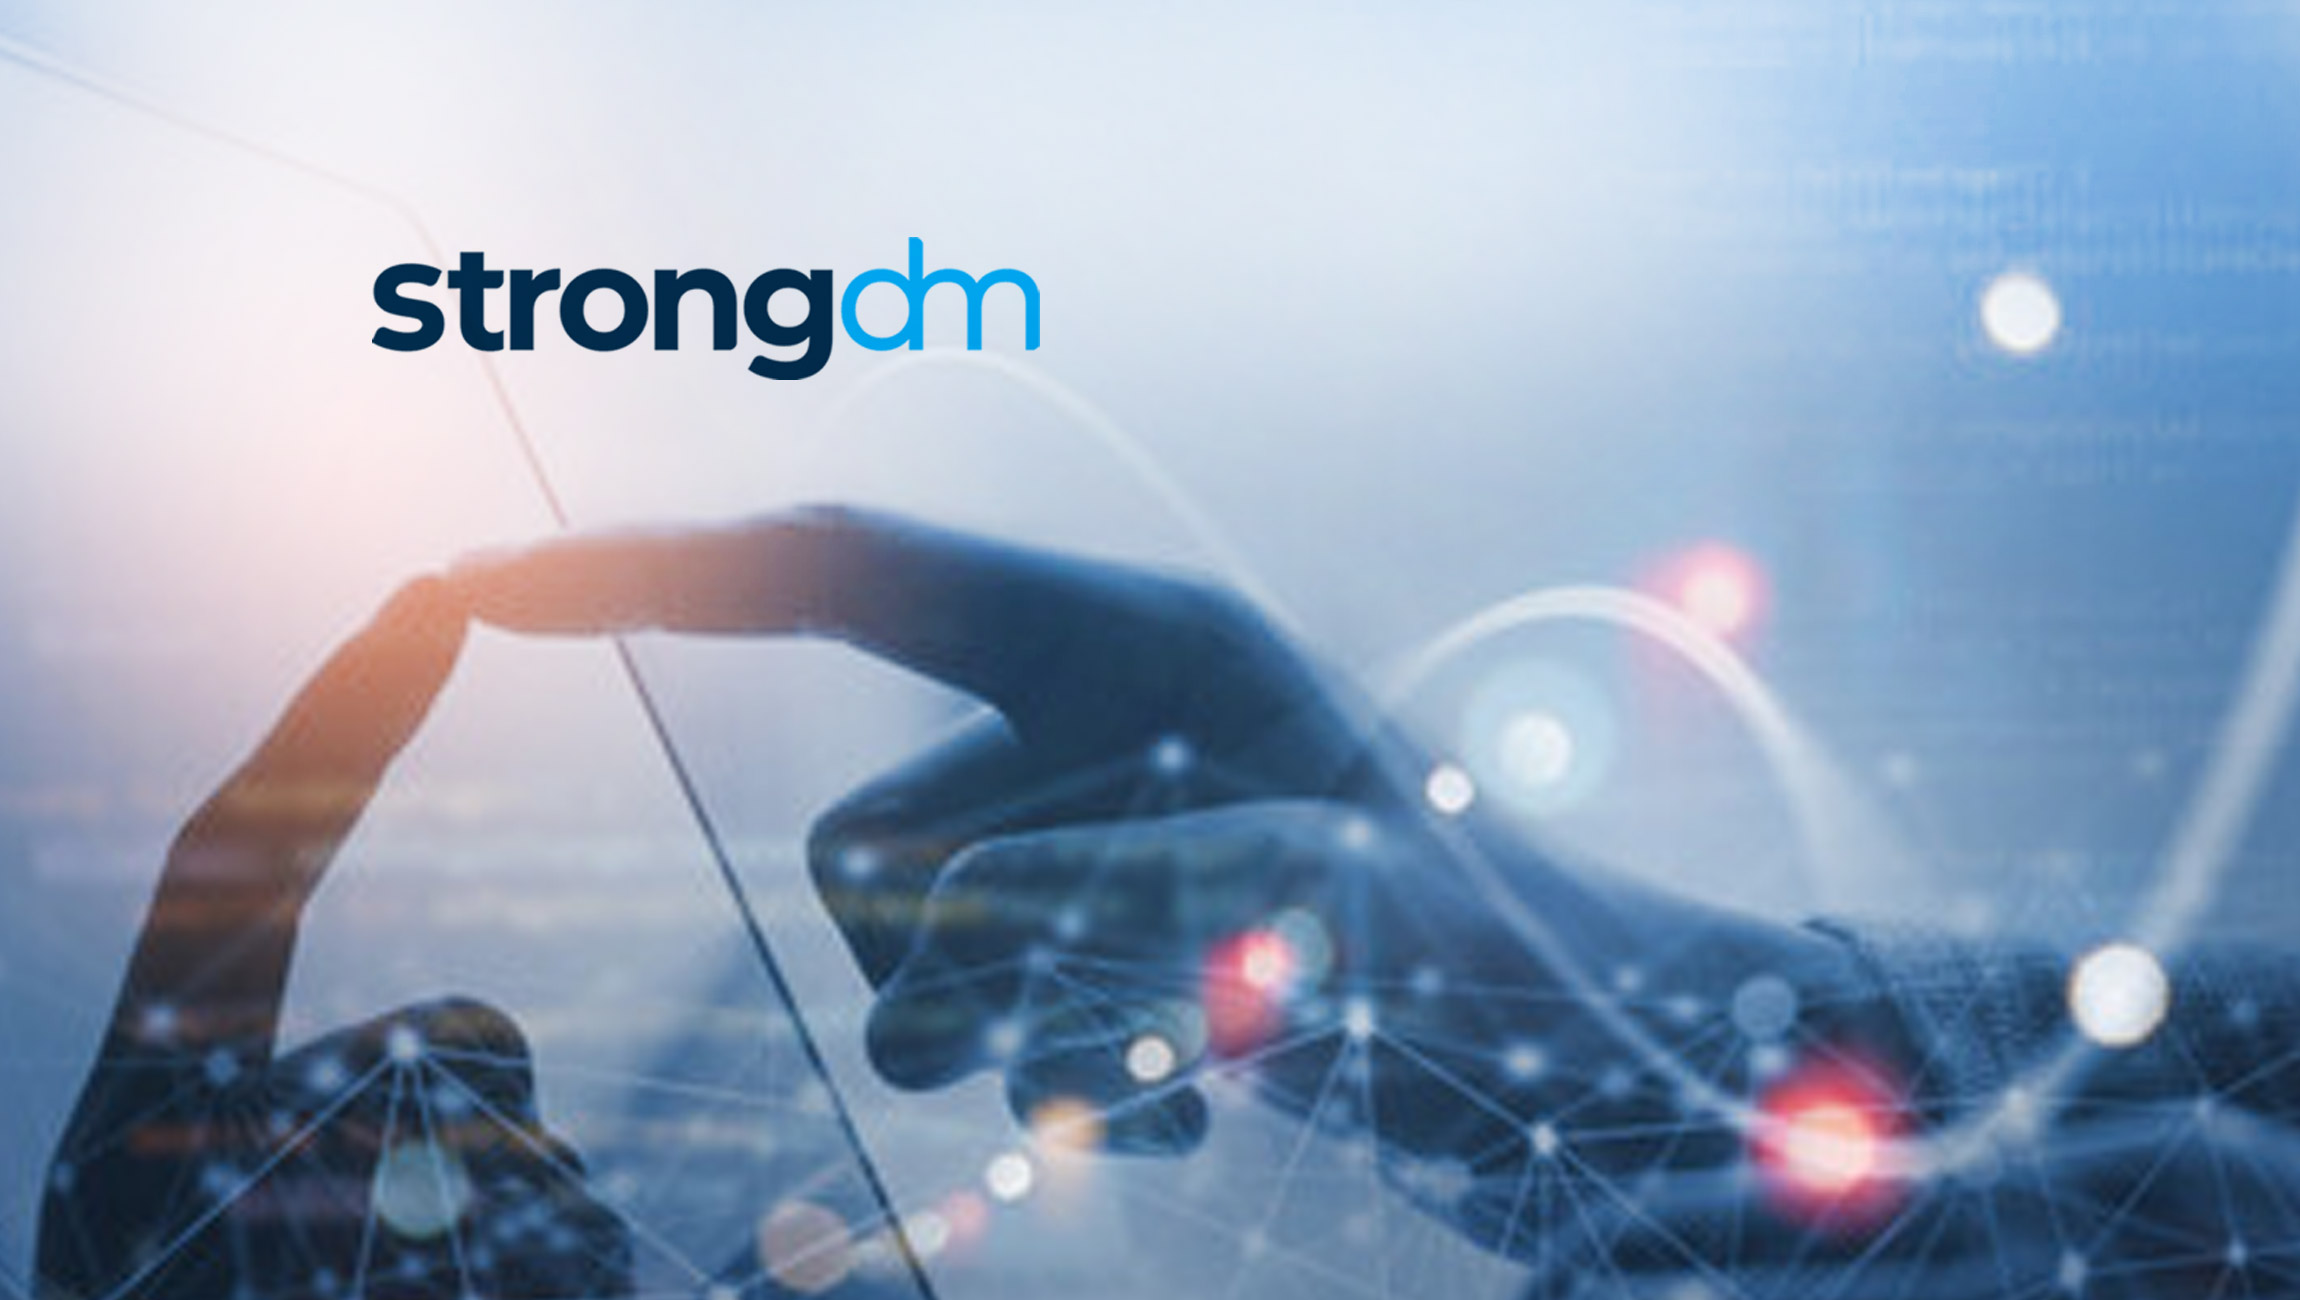 strongDM - 80% of Organizations Say Infrastructure Access is Top Priority